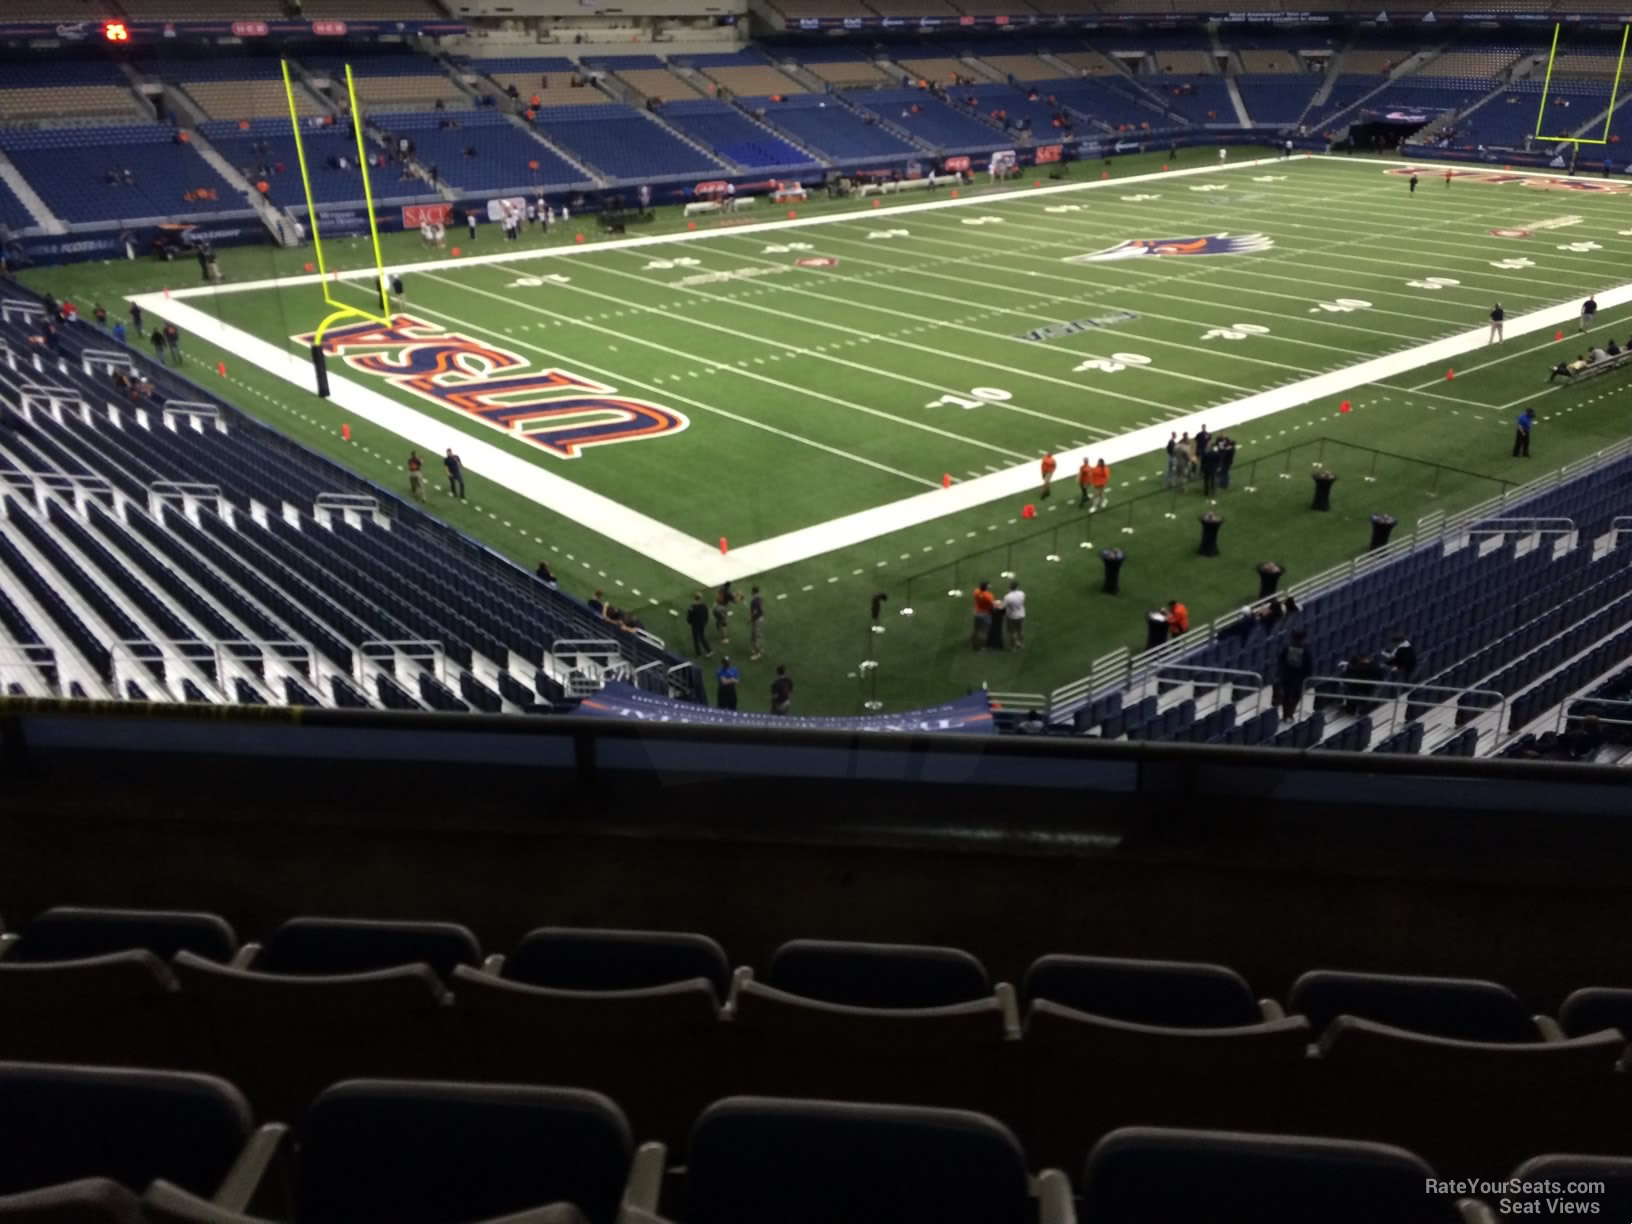 section 240d, row 5 seat view  for football - alamodome